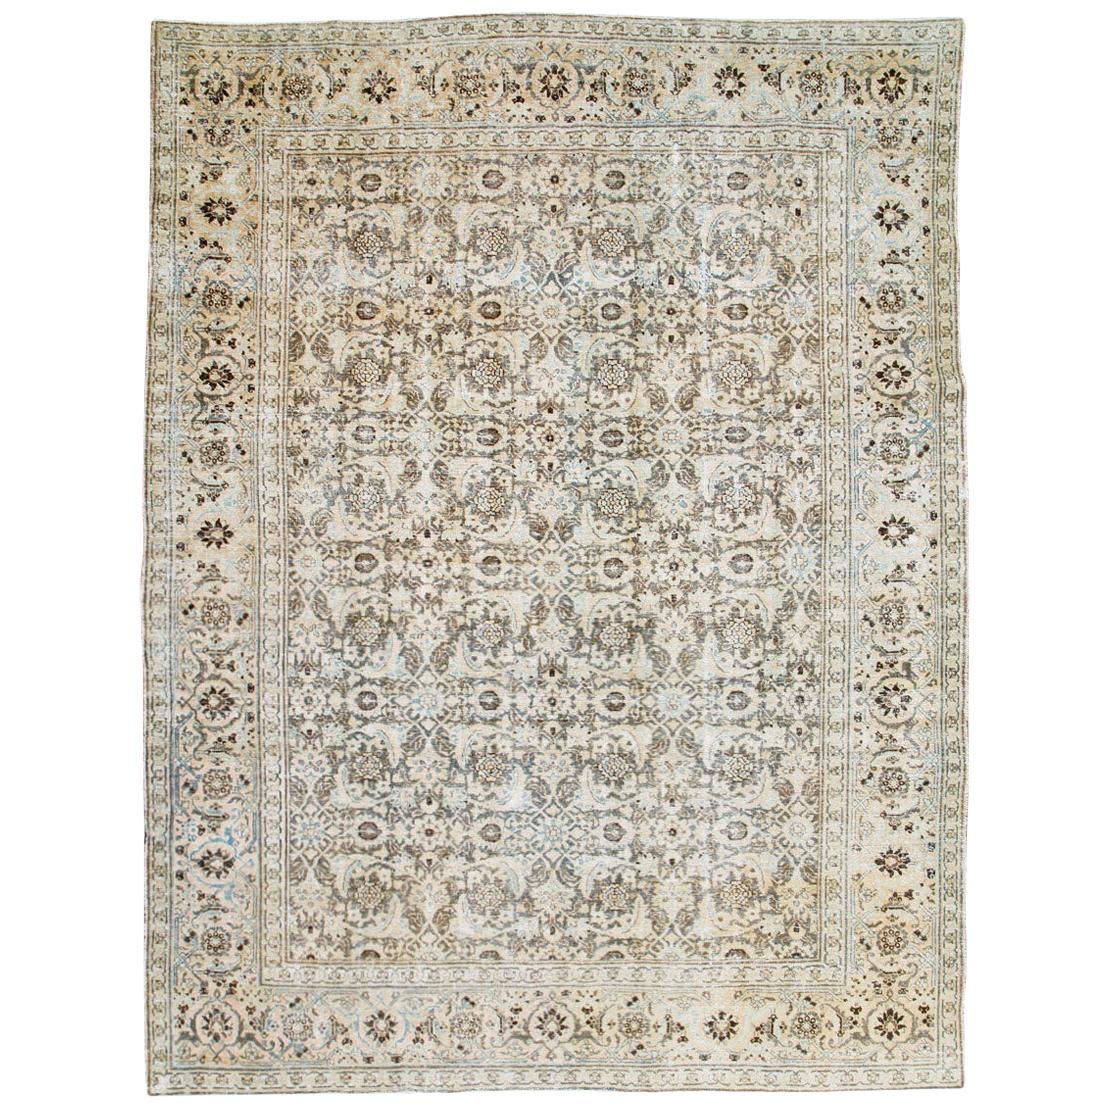 Distressed Room Size Handmade Persian Carpet in Charcoal Brown, Nude, and Blue